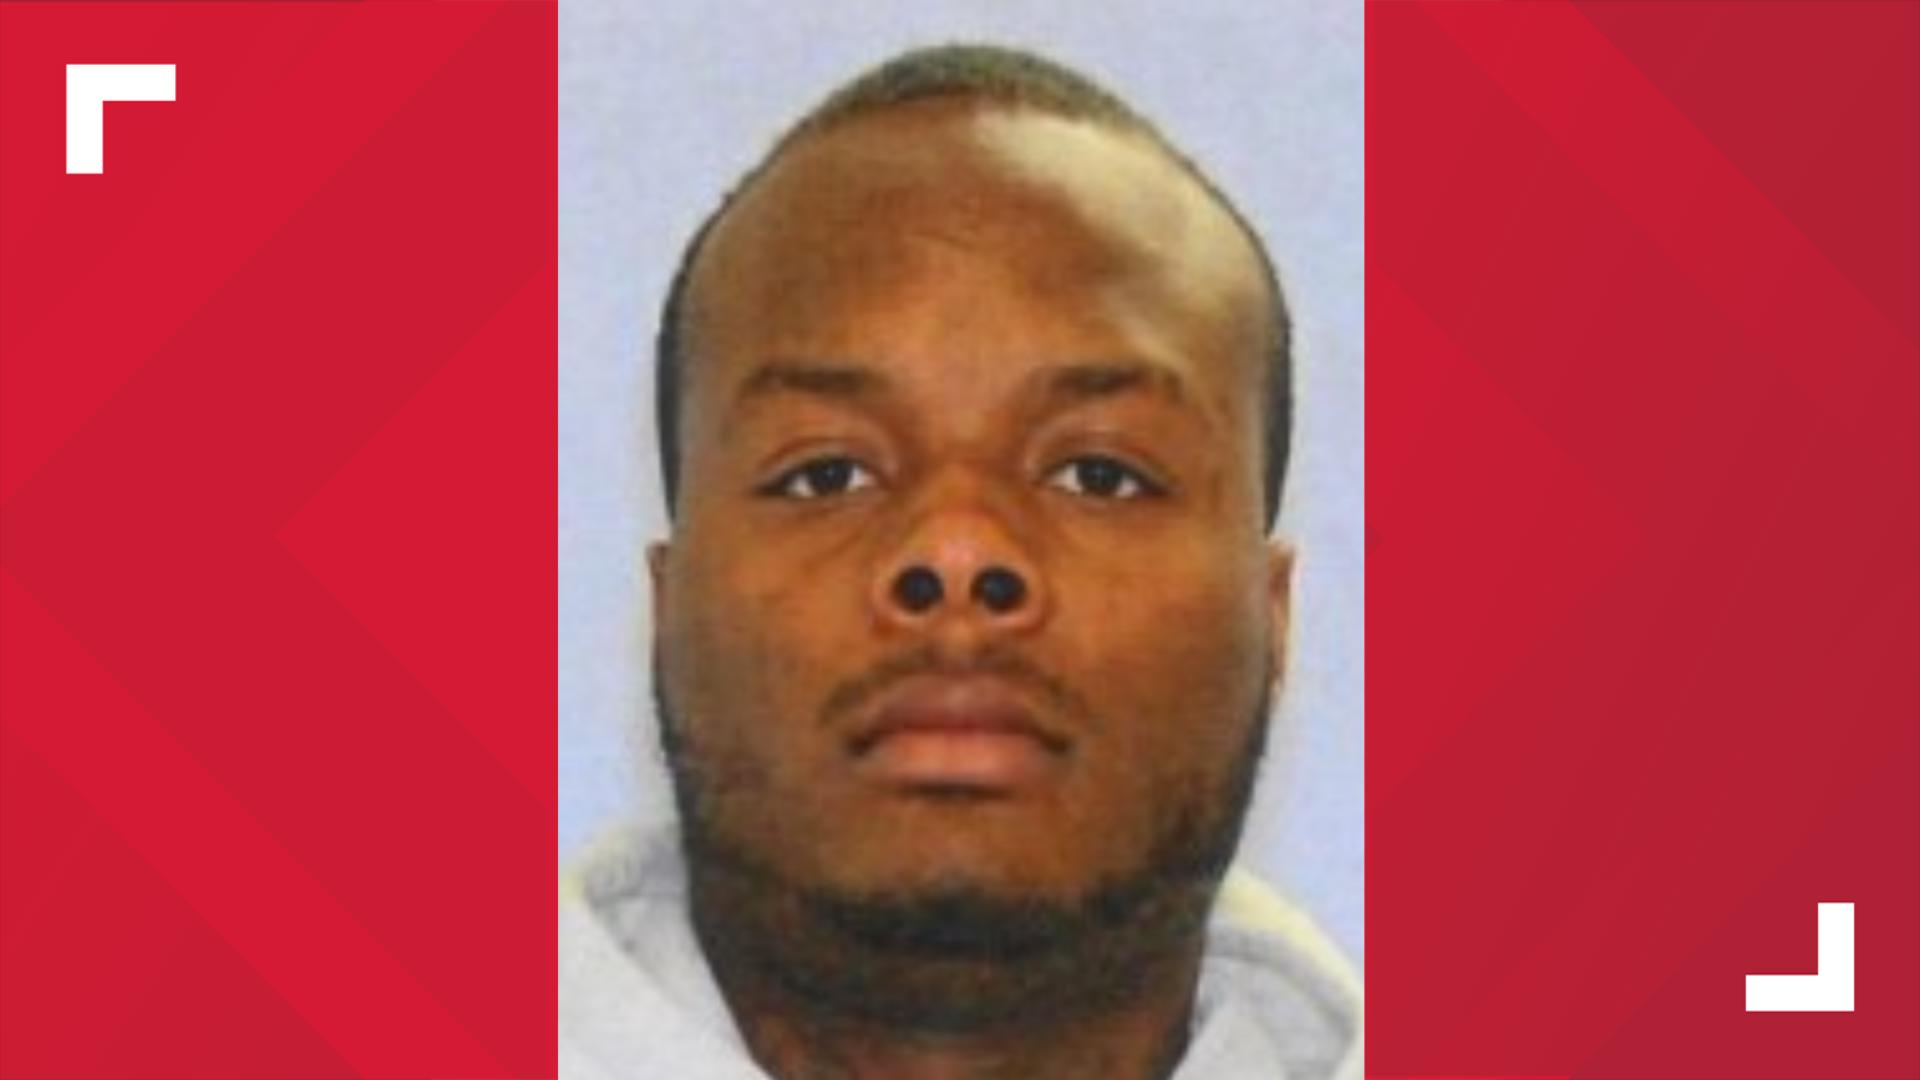 According to a report, the person inside the apartment was 24-year-old Deshawn Anthony Vaughn, the suspect in the fatal shooting of Euclid officer Jacob Derbin.